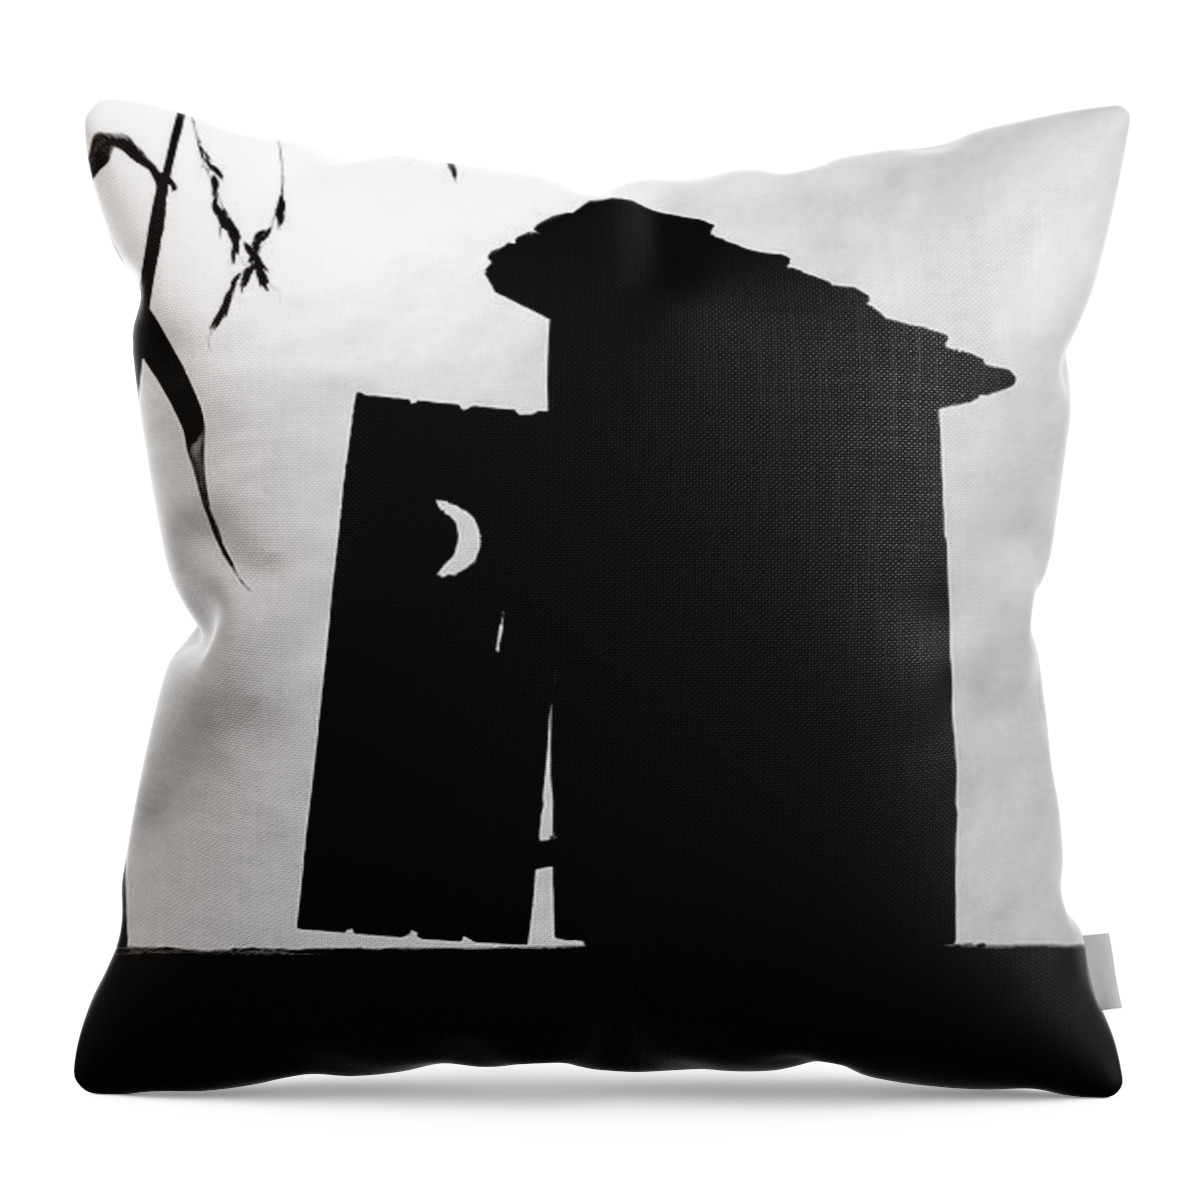 Still Life Throw Pillow featuring the photograph The Outhouse by Mary Lee Dereske